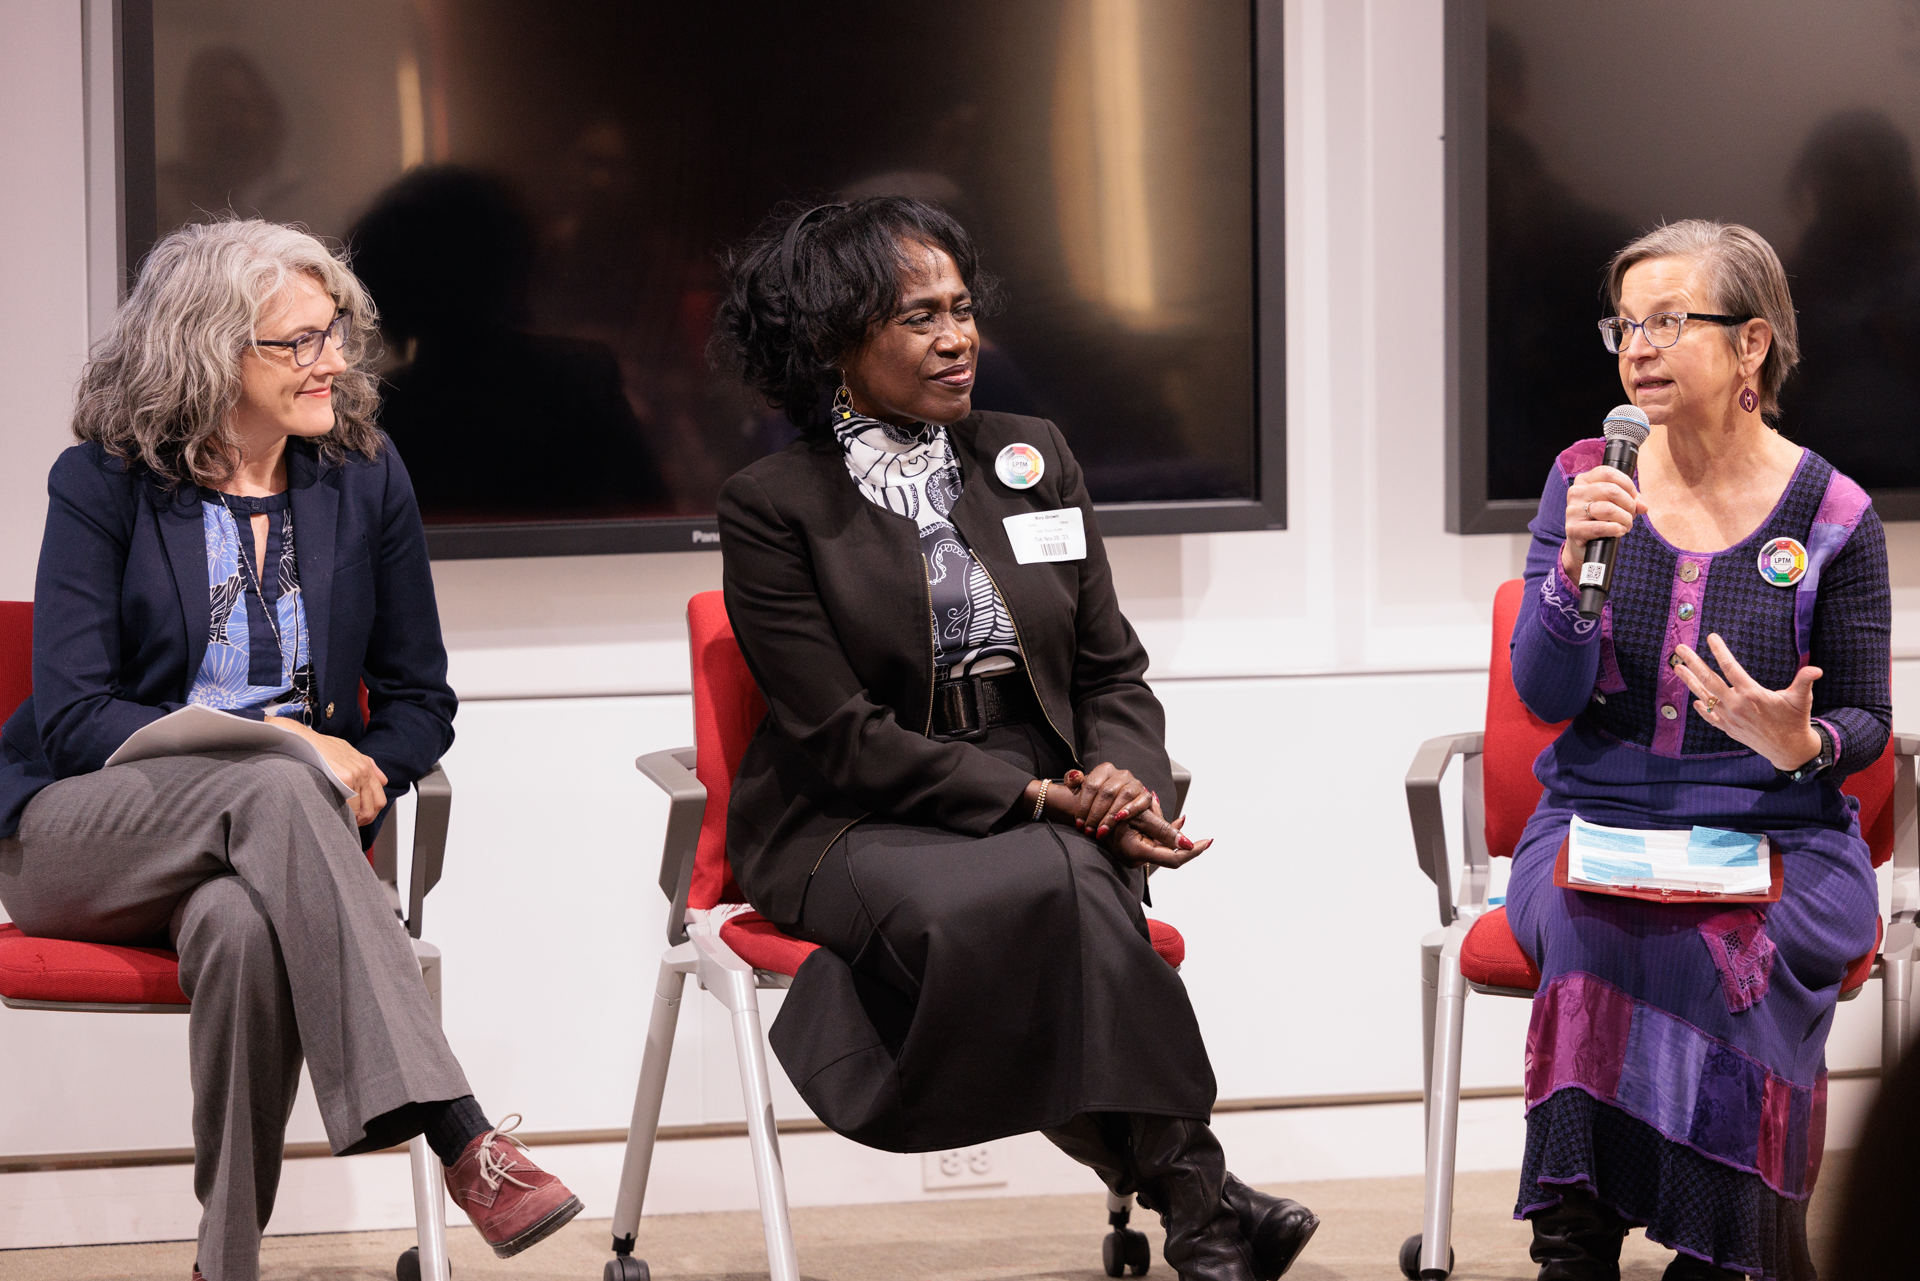 Wendy Wagner, Mary Brown and Phyllis Mentzell Ryder discussed mutually empowering partnerships between people from academic and community institutions. (William Atkins/GW Today)